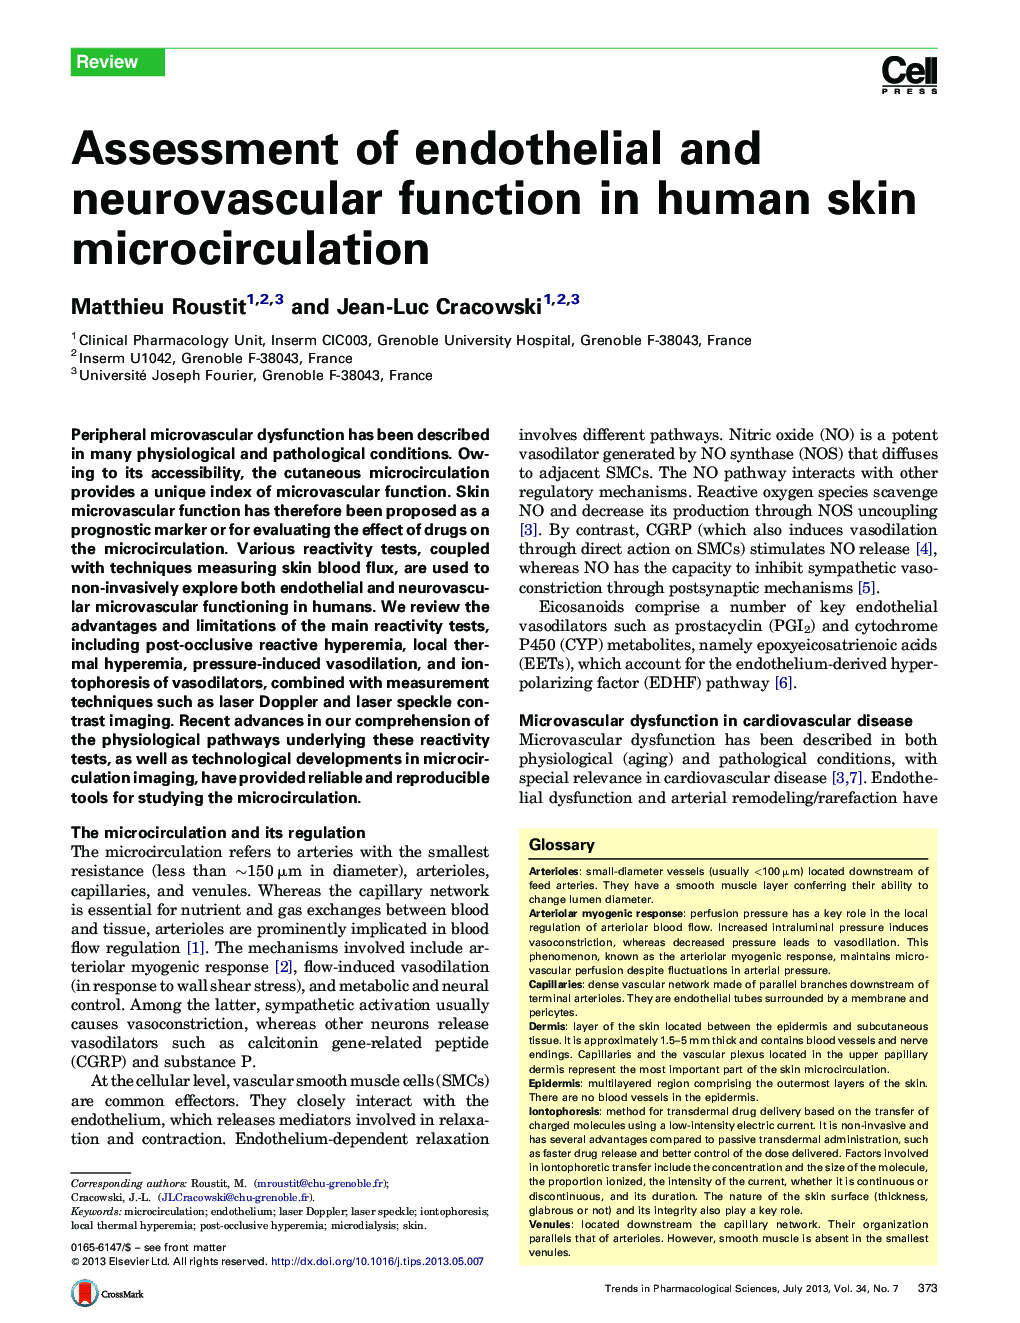 Assessment of endothelial and neurovascular function in human skin microcirculation